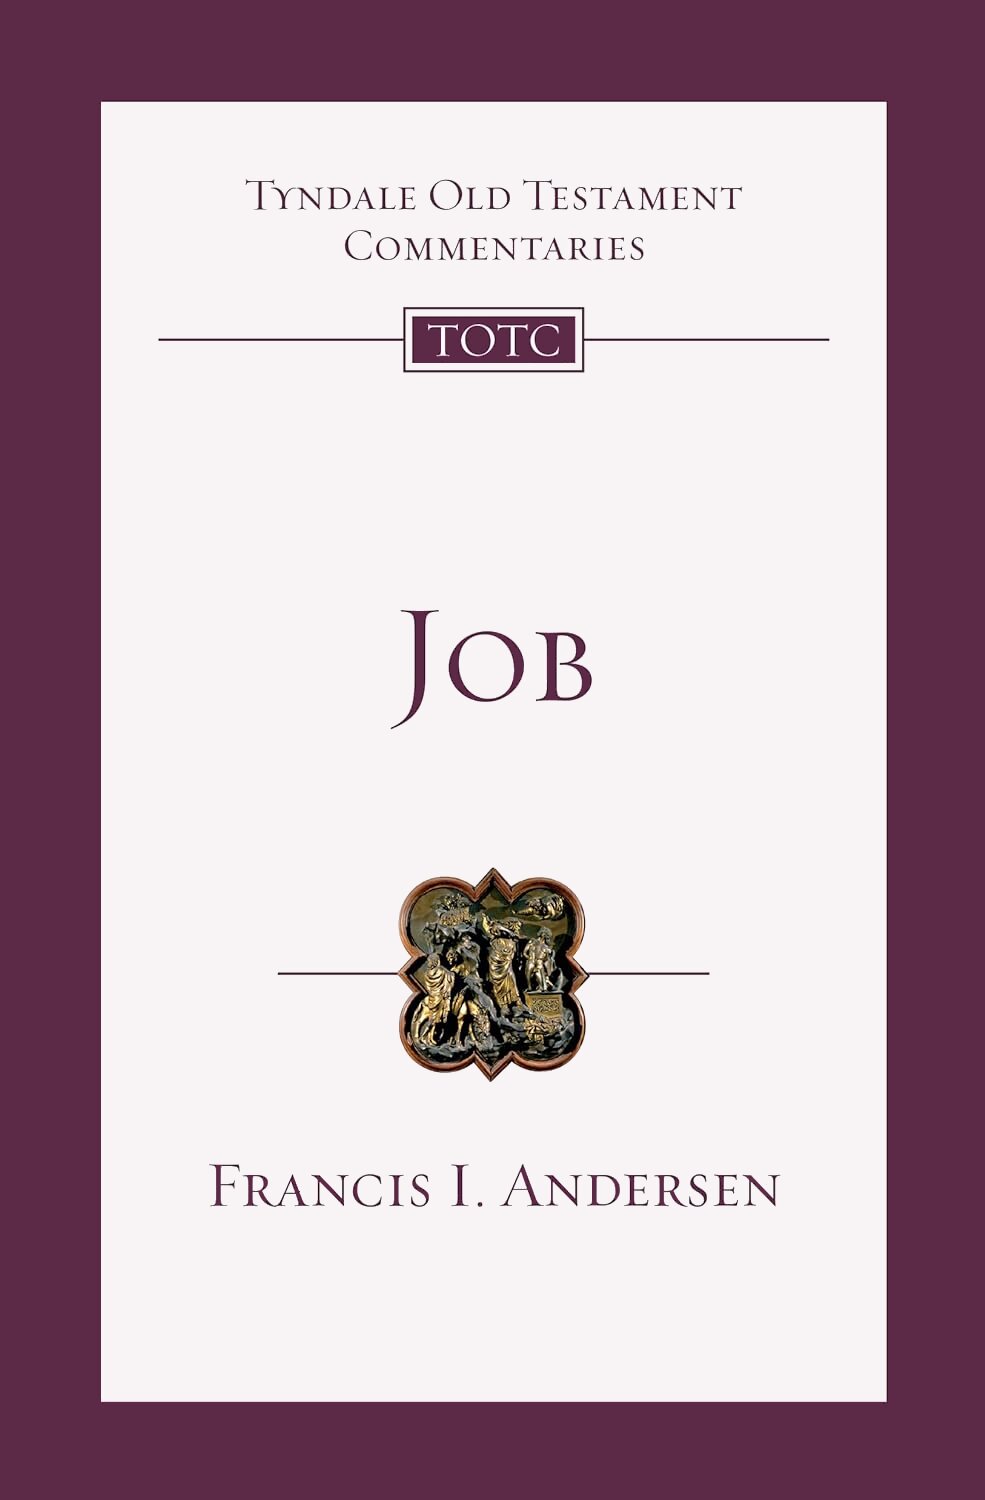 Job (Tyndale Old Testament Commentaries | TOTC)